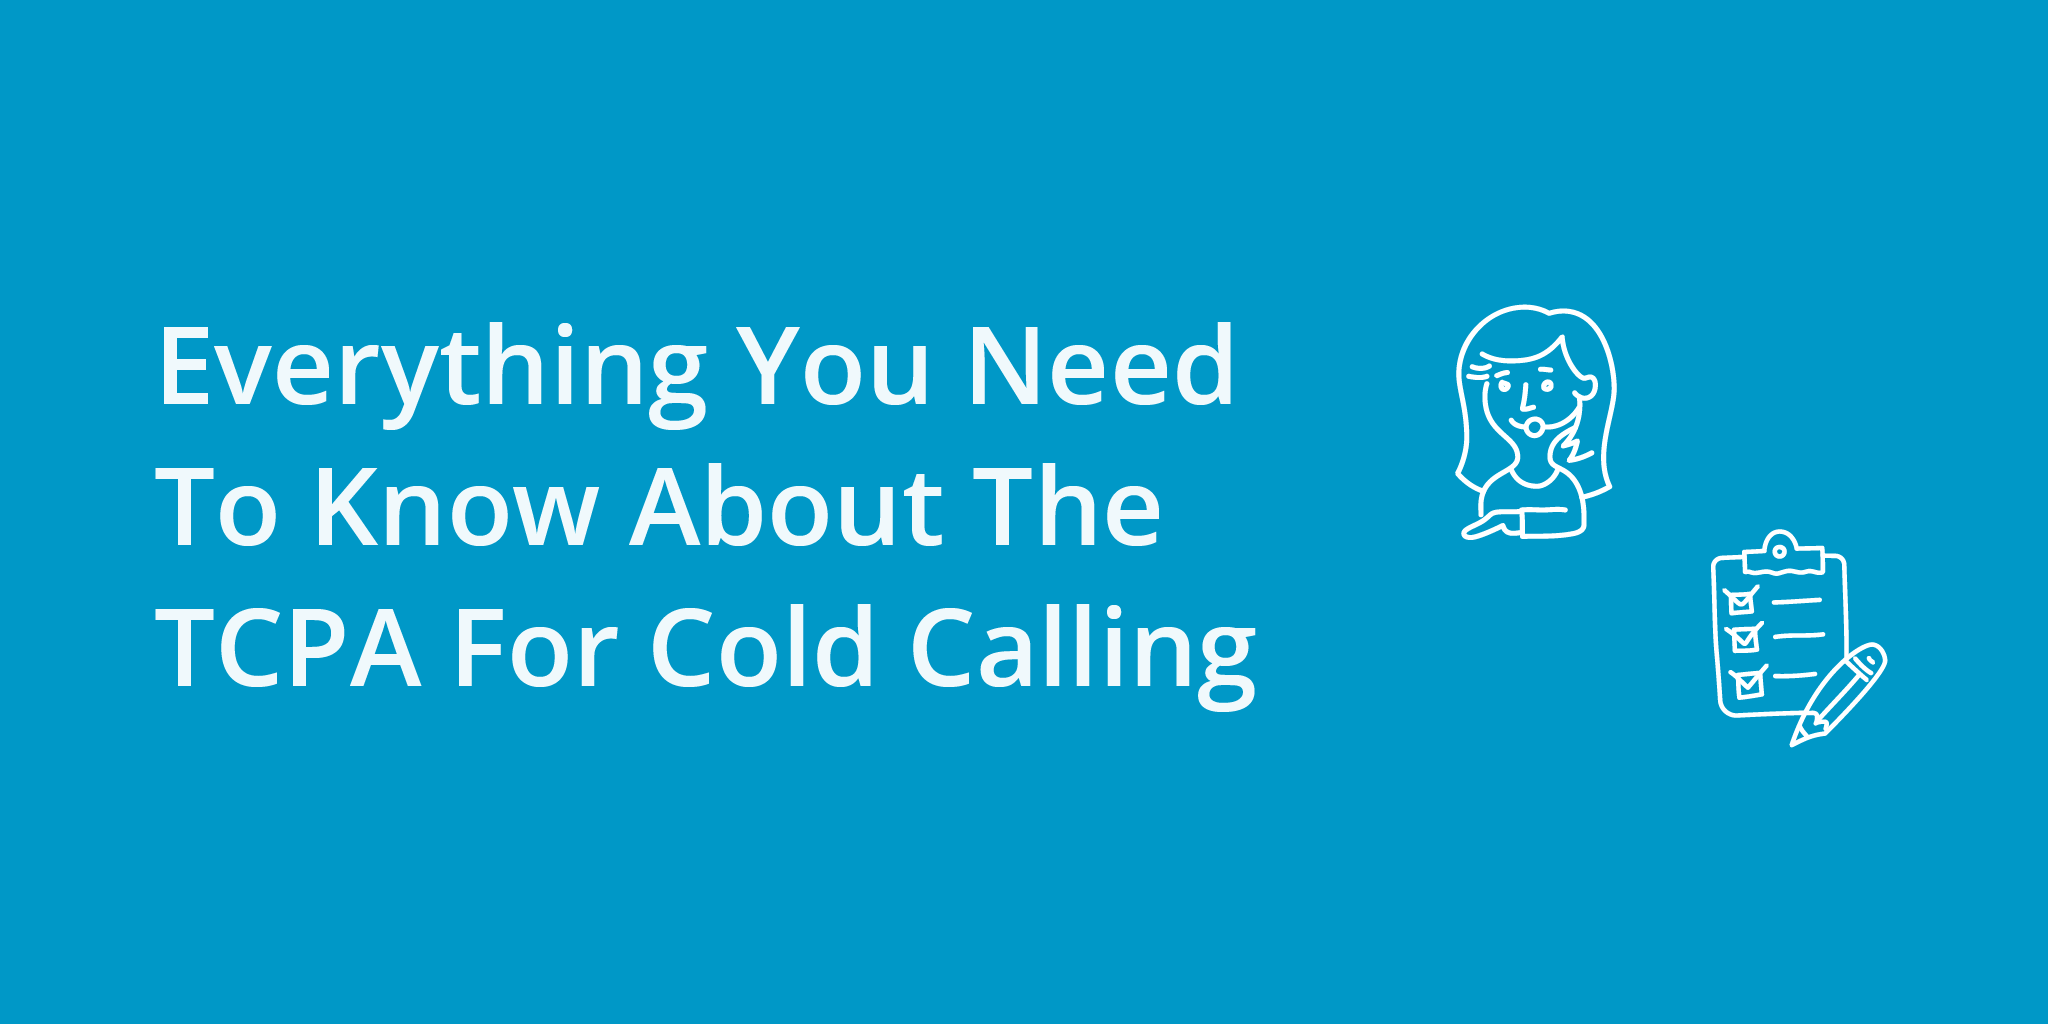 Everything You Need To Know About The TCPA For Cold Calling